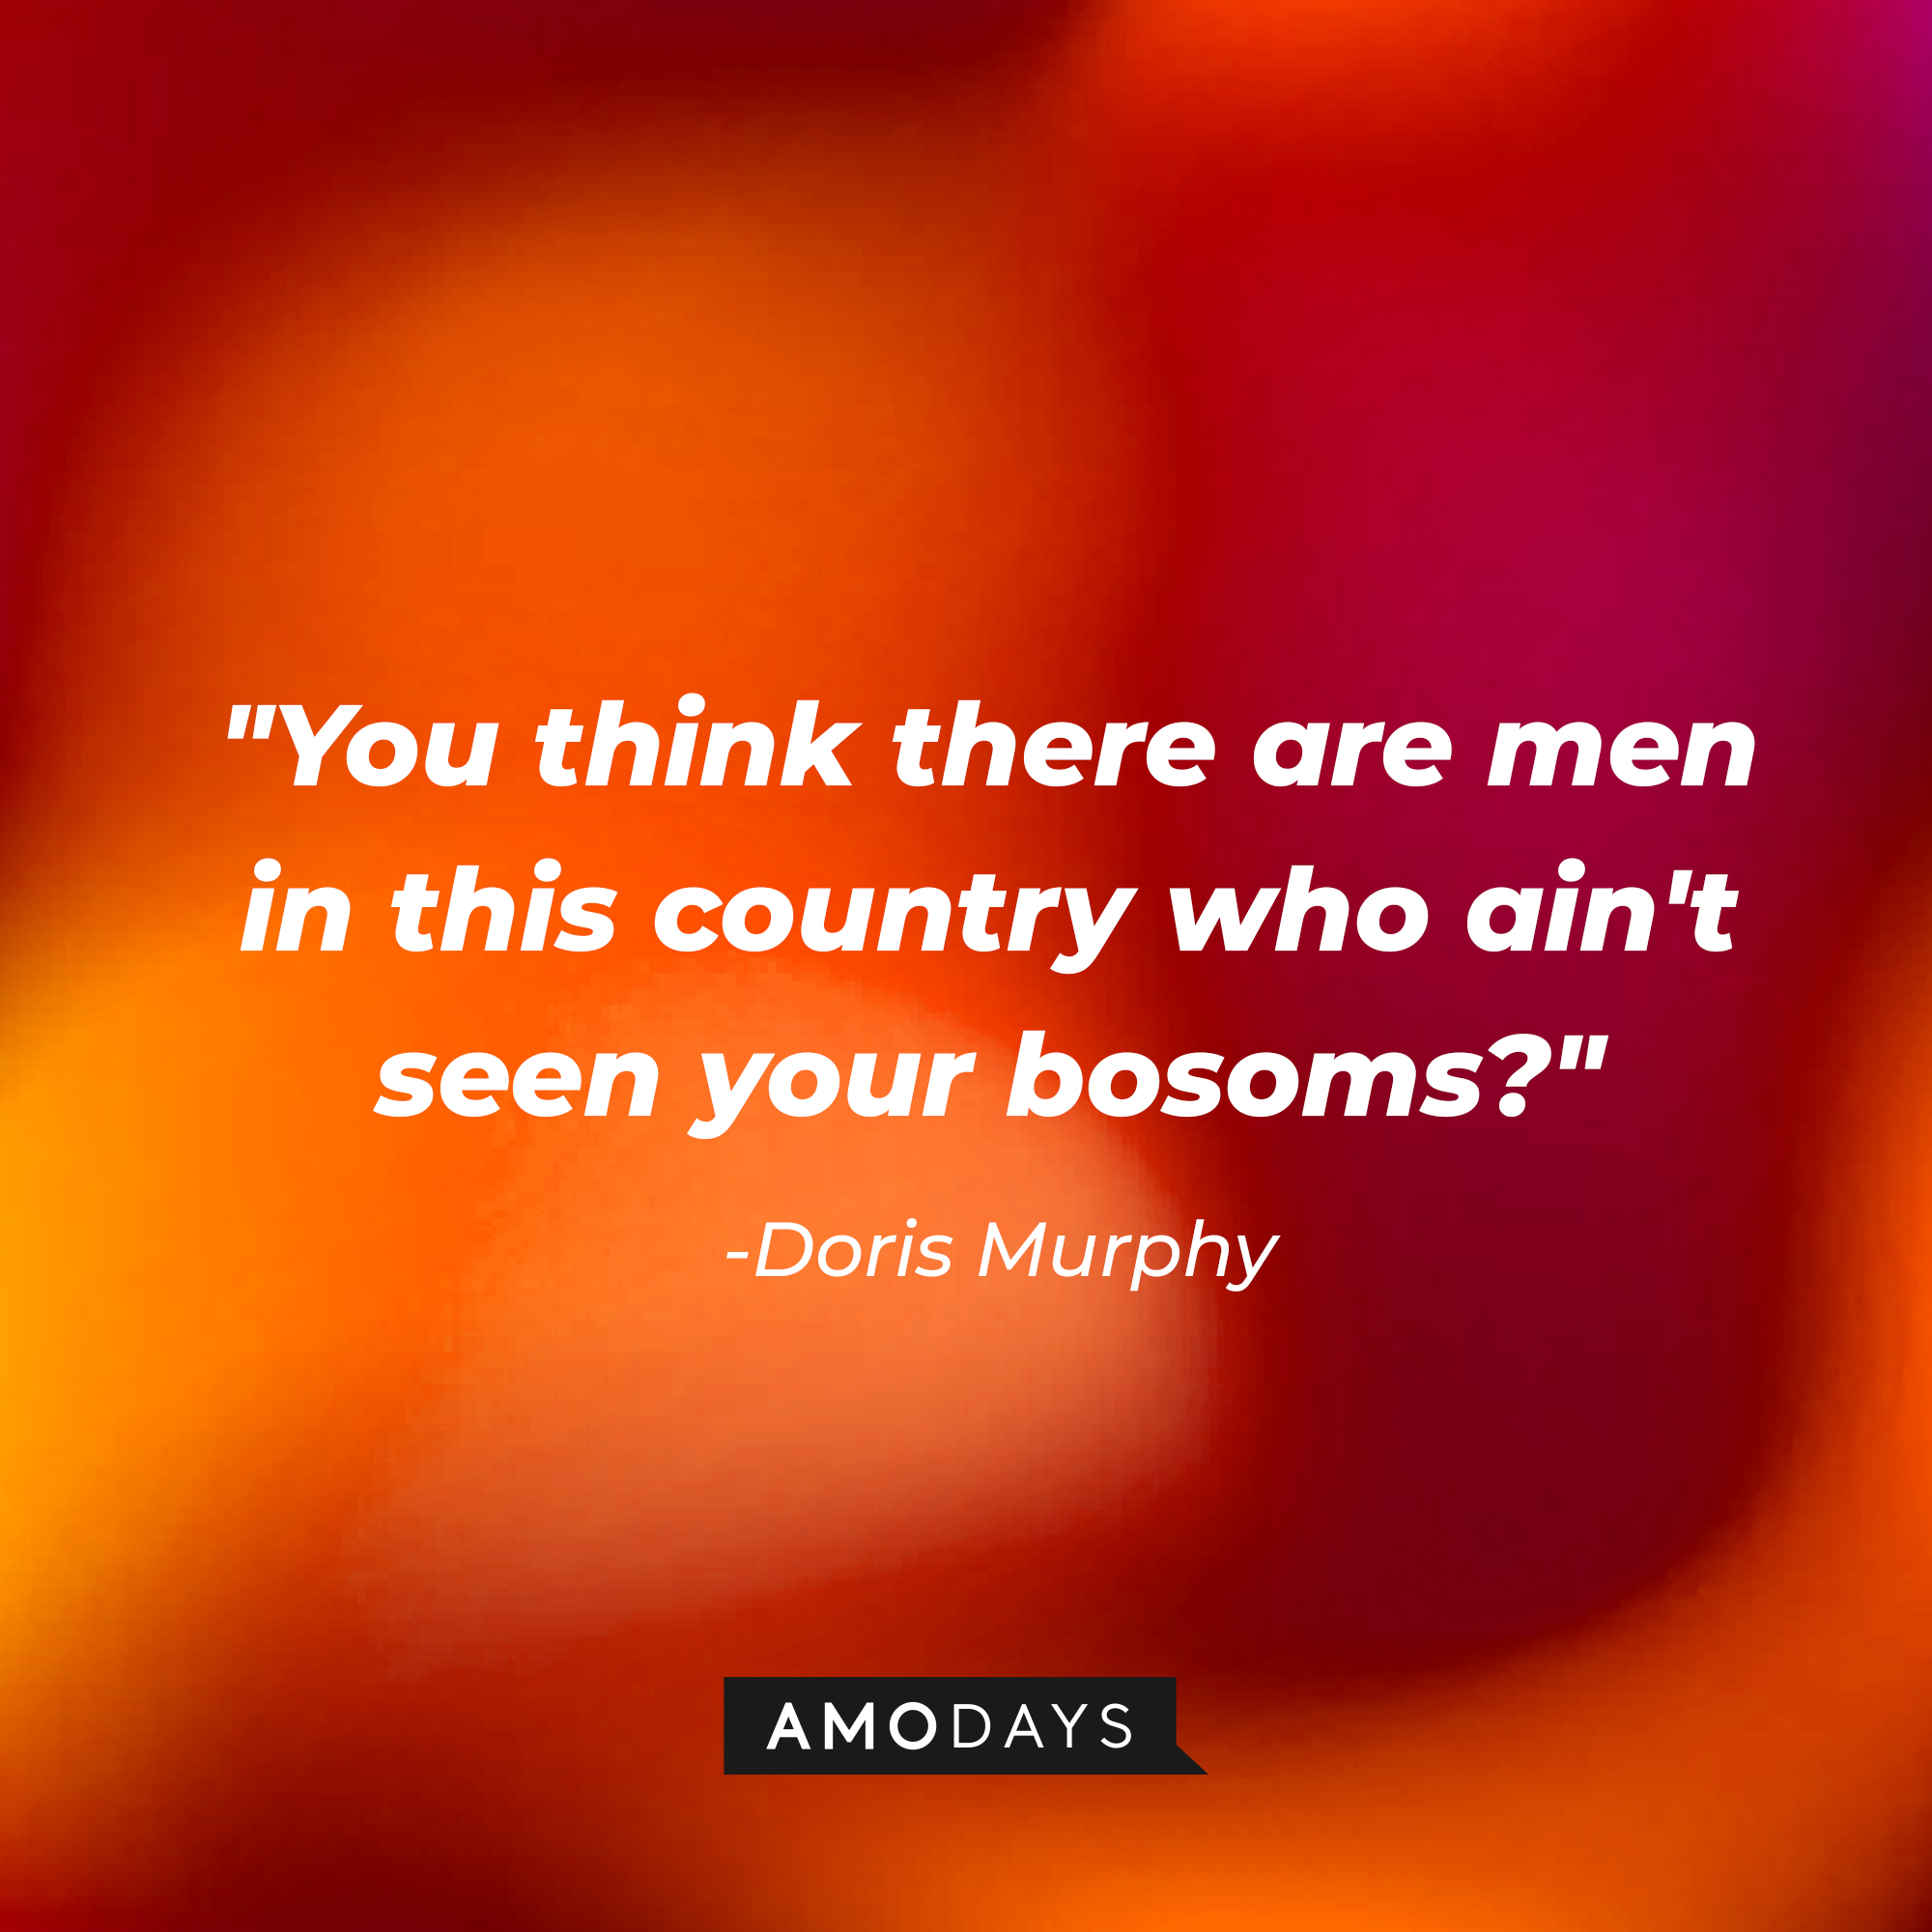 Doris Murphy's quote: "You think there are men in this country who ain't seen your bosoms?" | Source: AmoDays